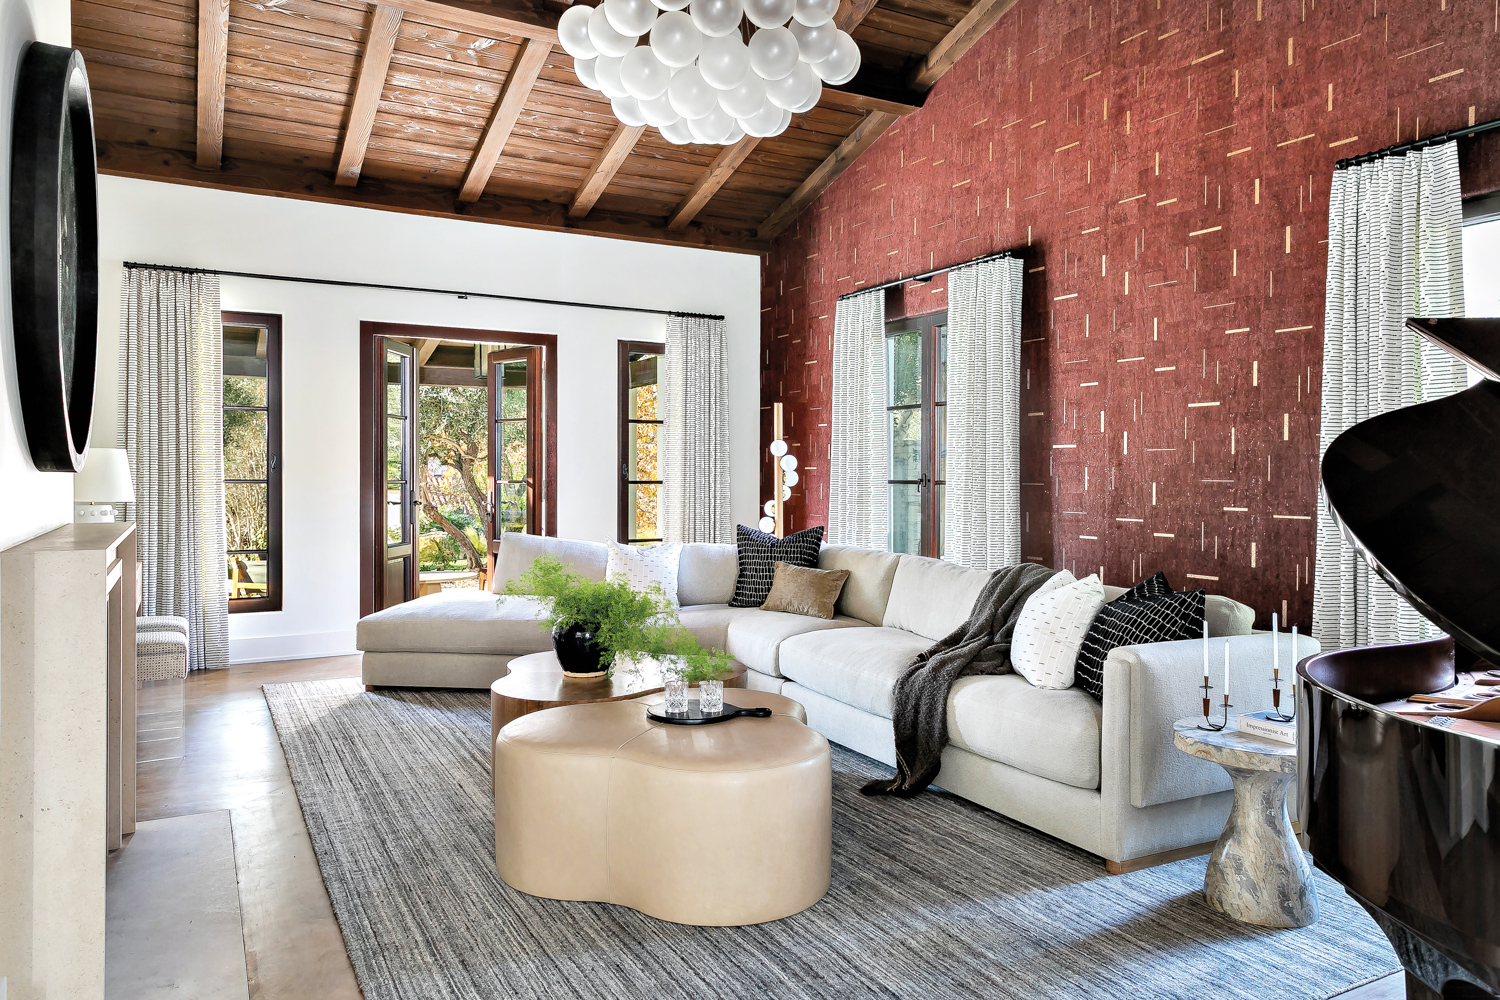 Living room with red wall covering with gold details, cloud-shaped chandelier and curvy, neutral-hued furnishings